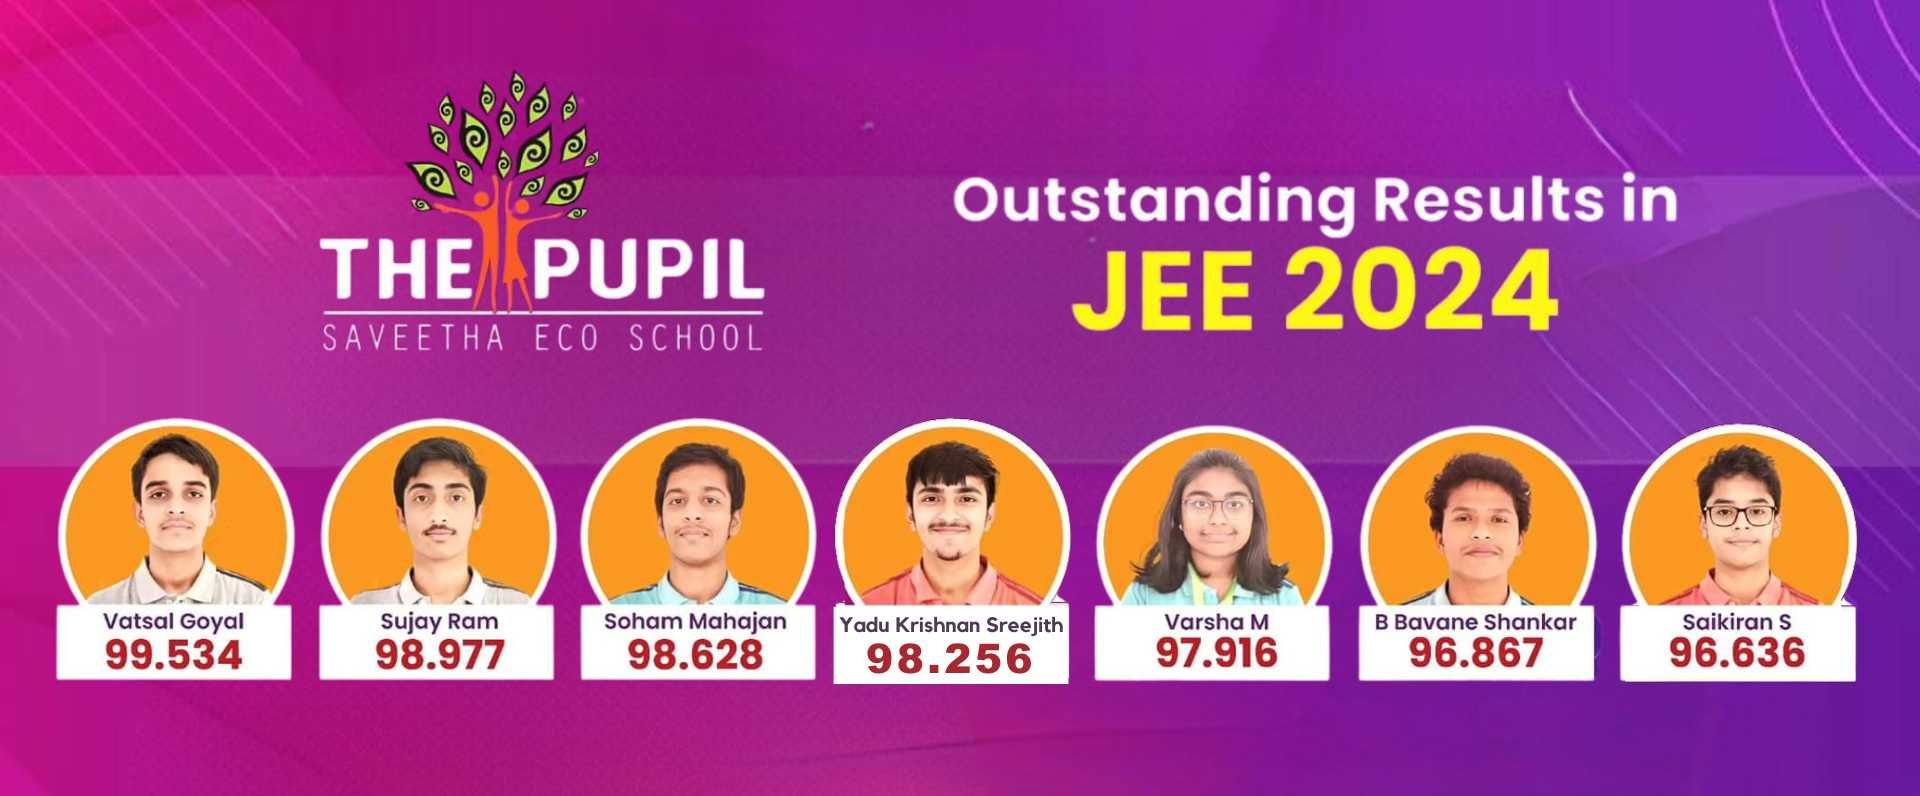 Outstanding Results in JEE 2024